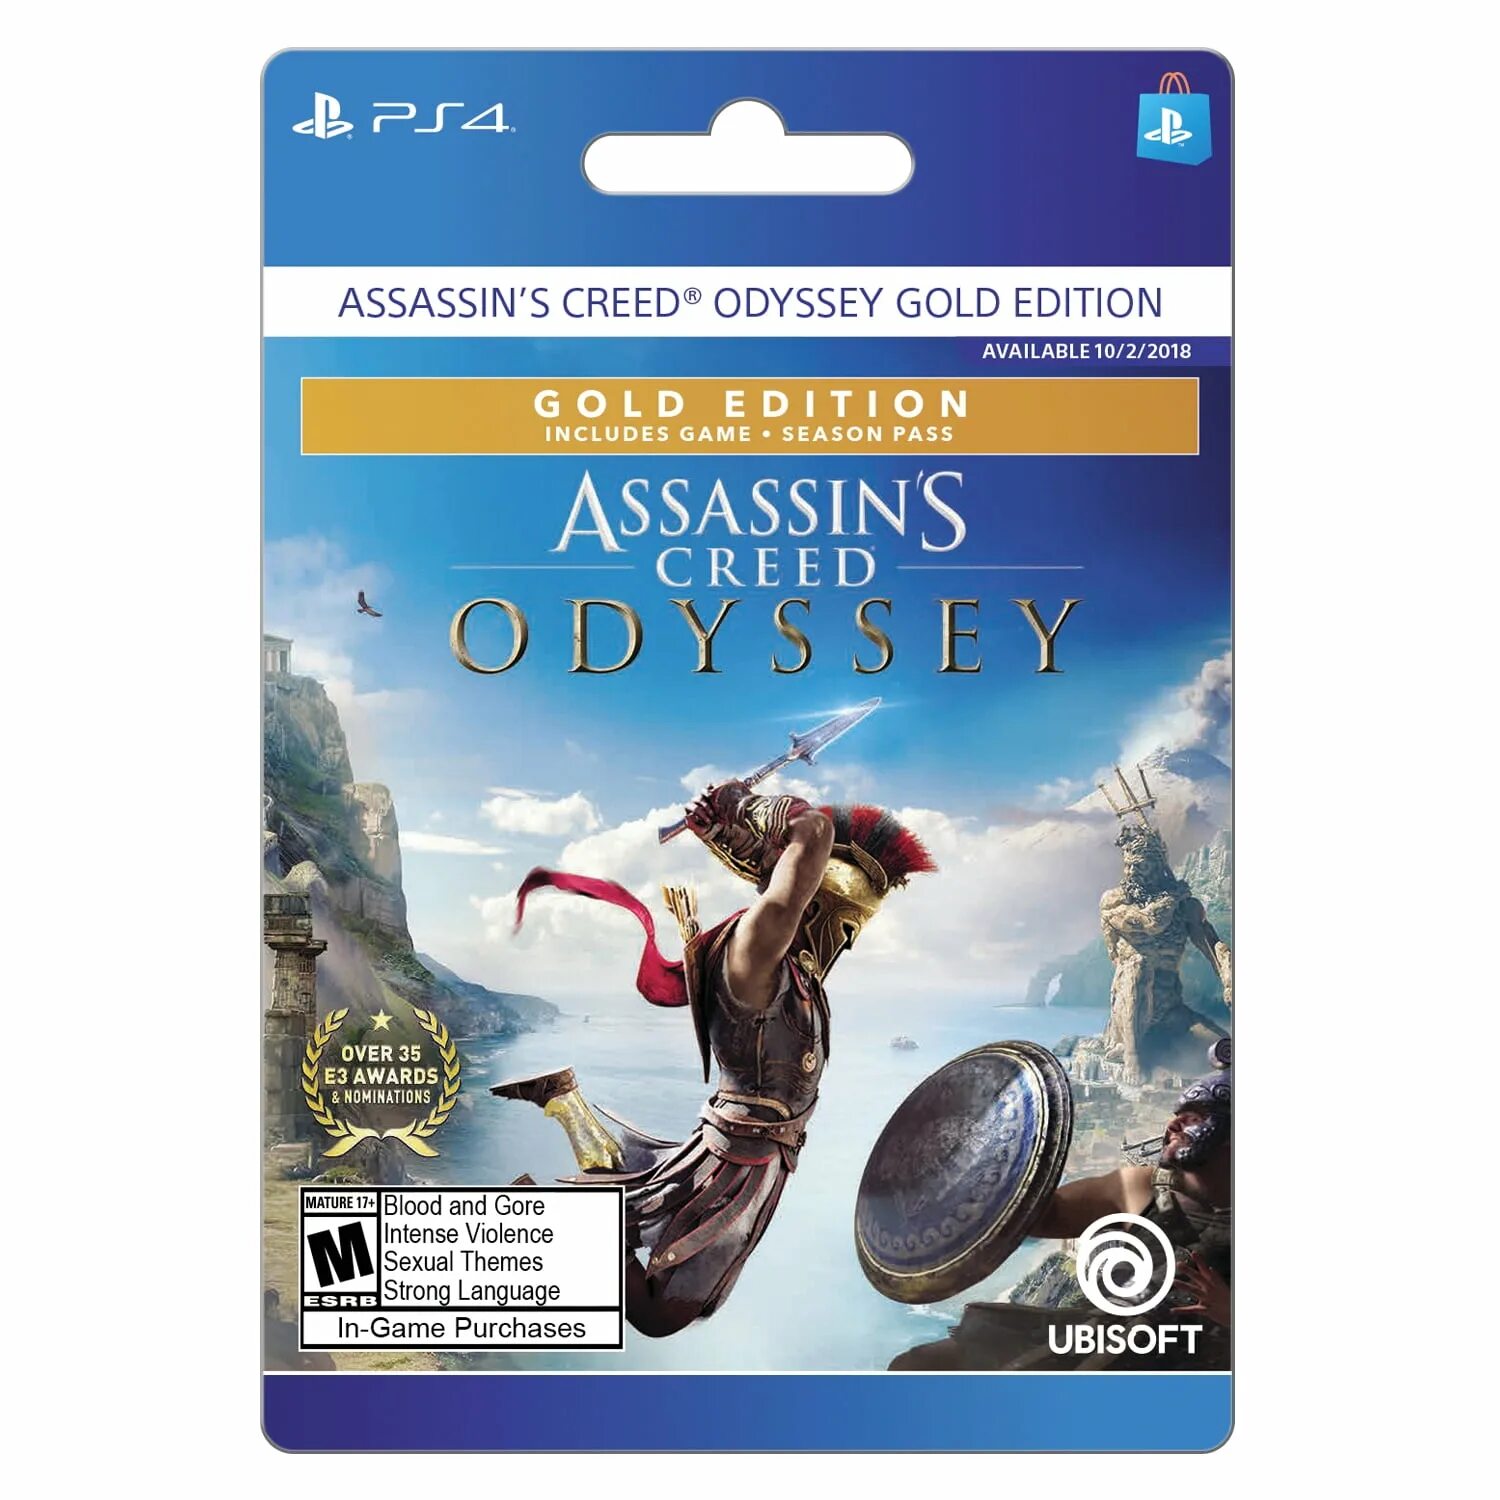 Ps4 gold edition. Assassin's Creed Odyssey Gold Edition ps4. Ассасин Крид Одиссея Голд эдишн. Assassin's Creed Odyssey Gold Edition ps4 диск. Ассасин Крид Одиссея пс4.